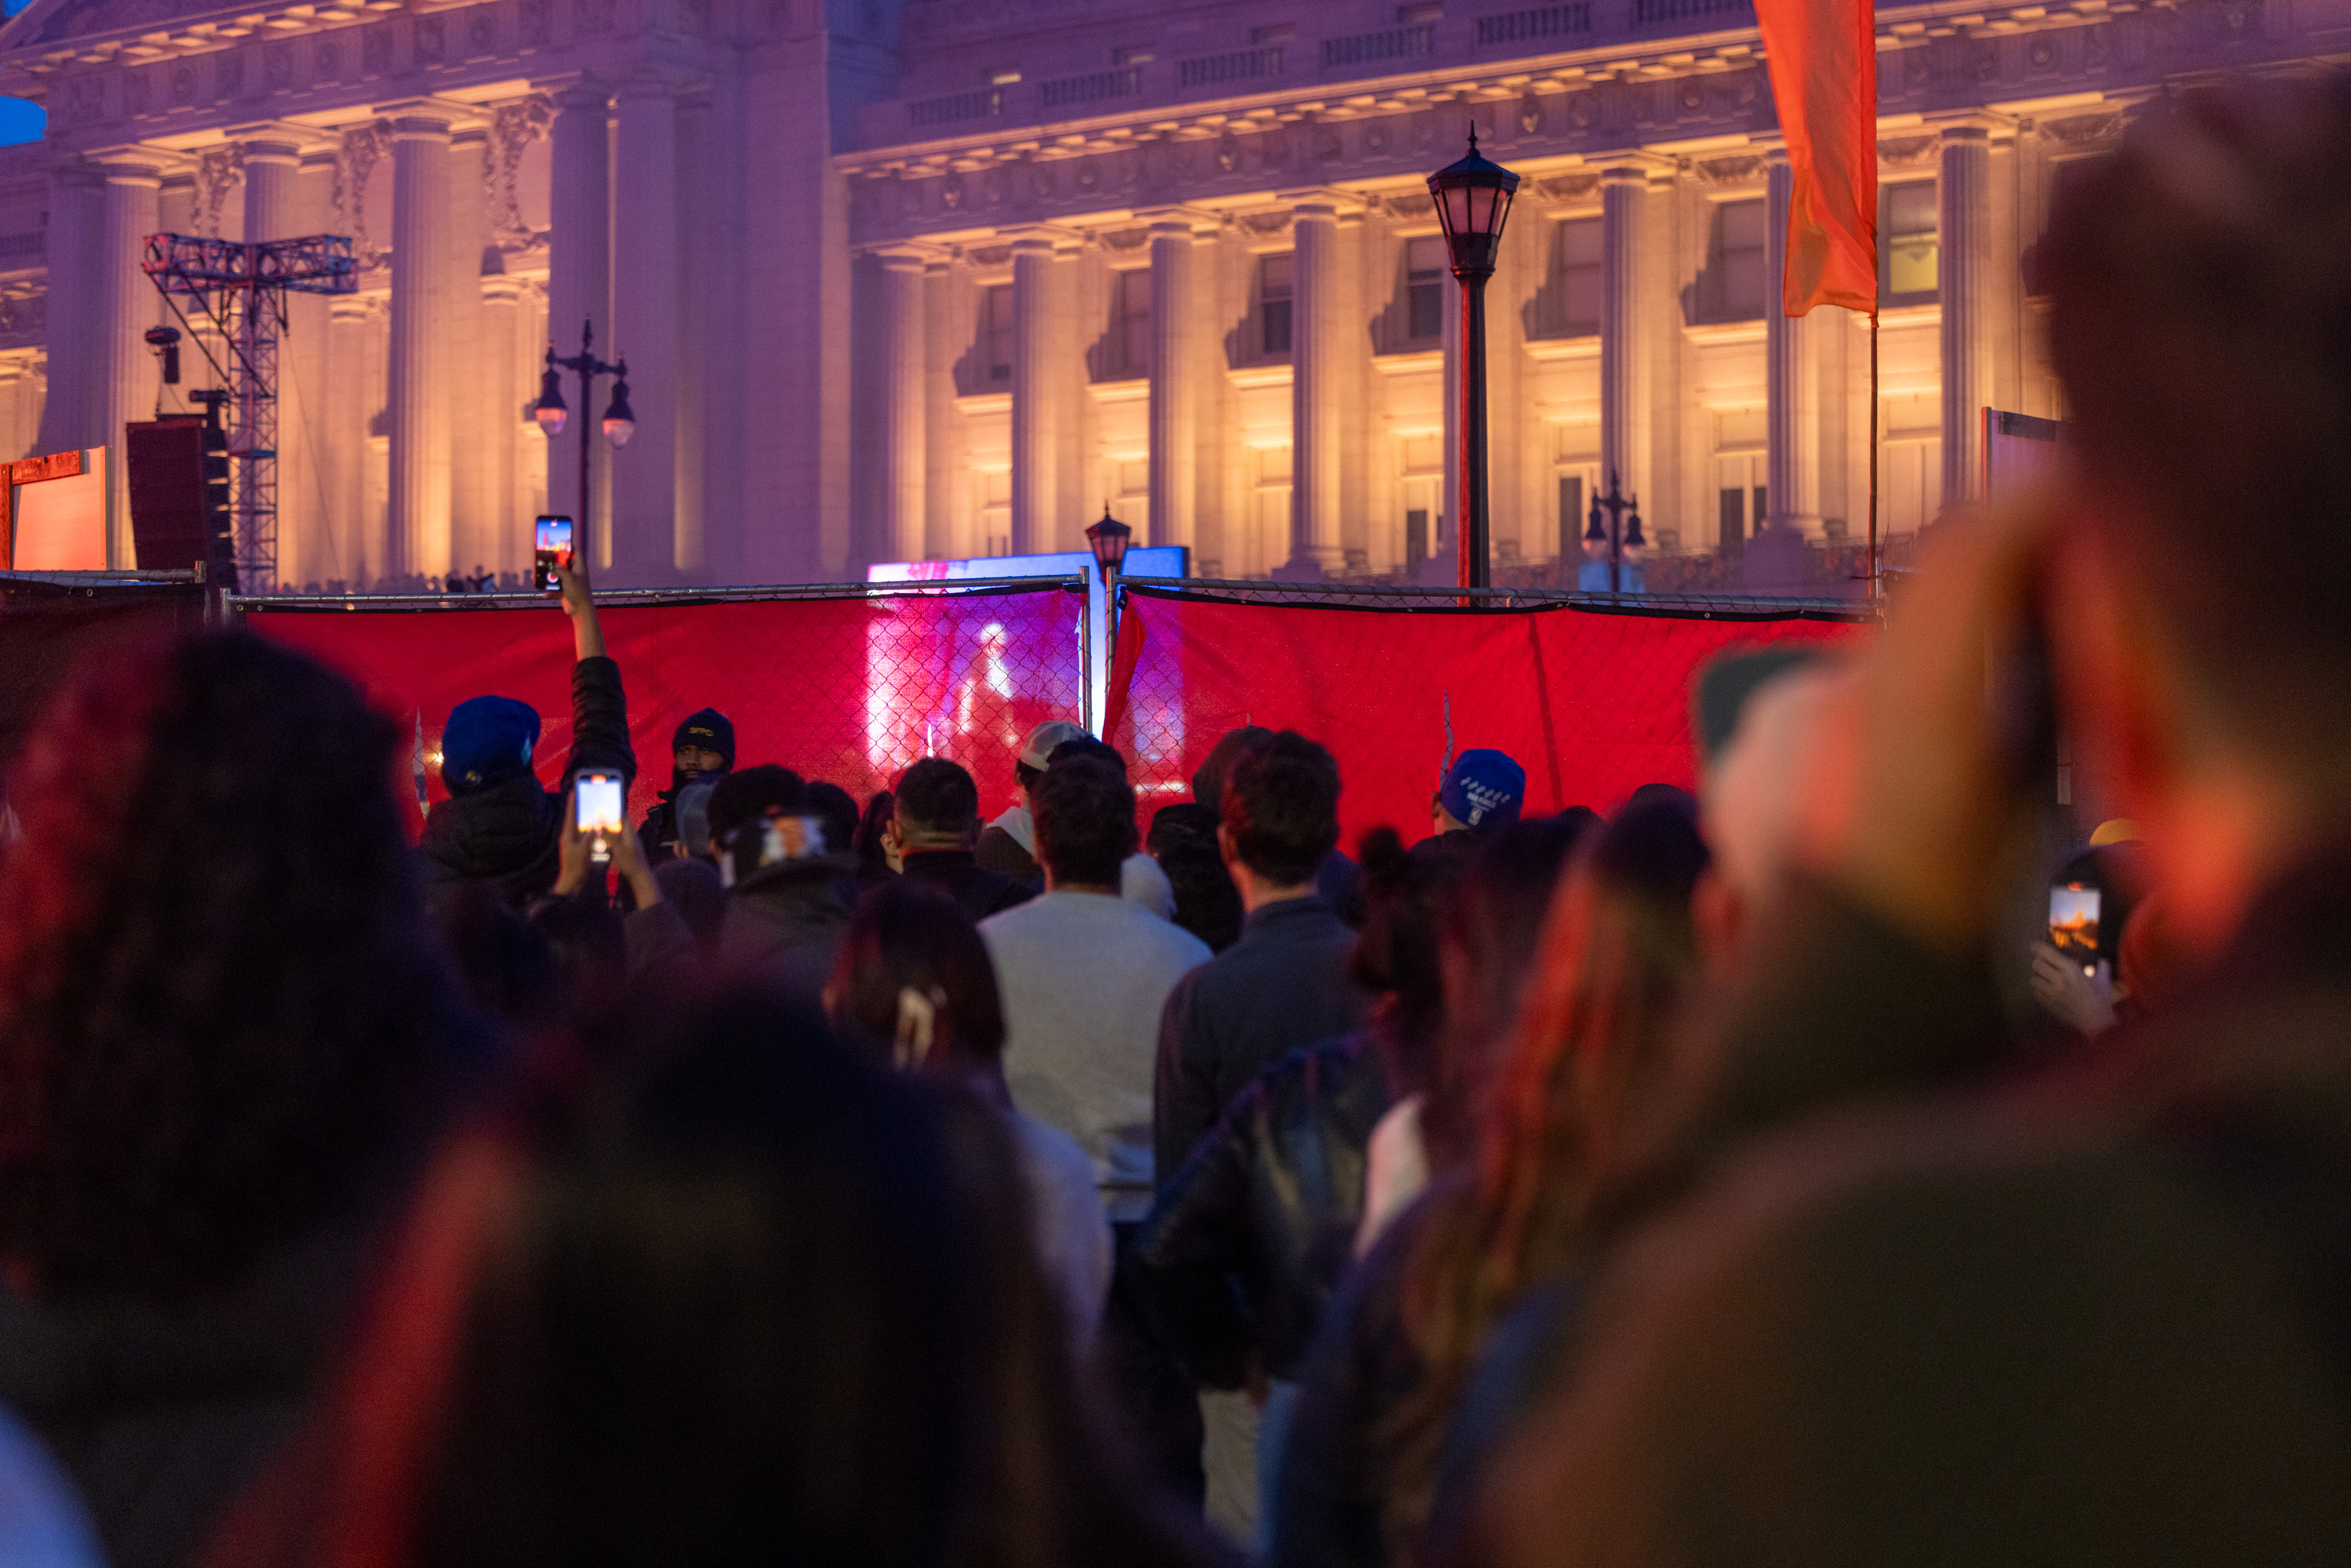 A crowd gathers in front of a lit, grand building at night. They are looking through a red barrier, holding up phones to capture photos or videos of something unseen.